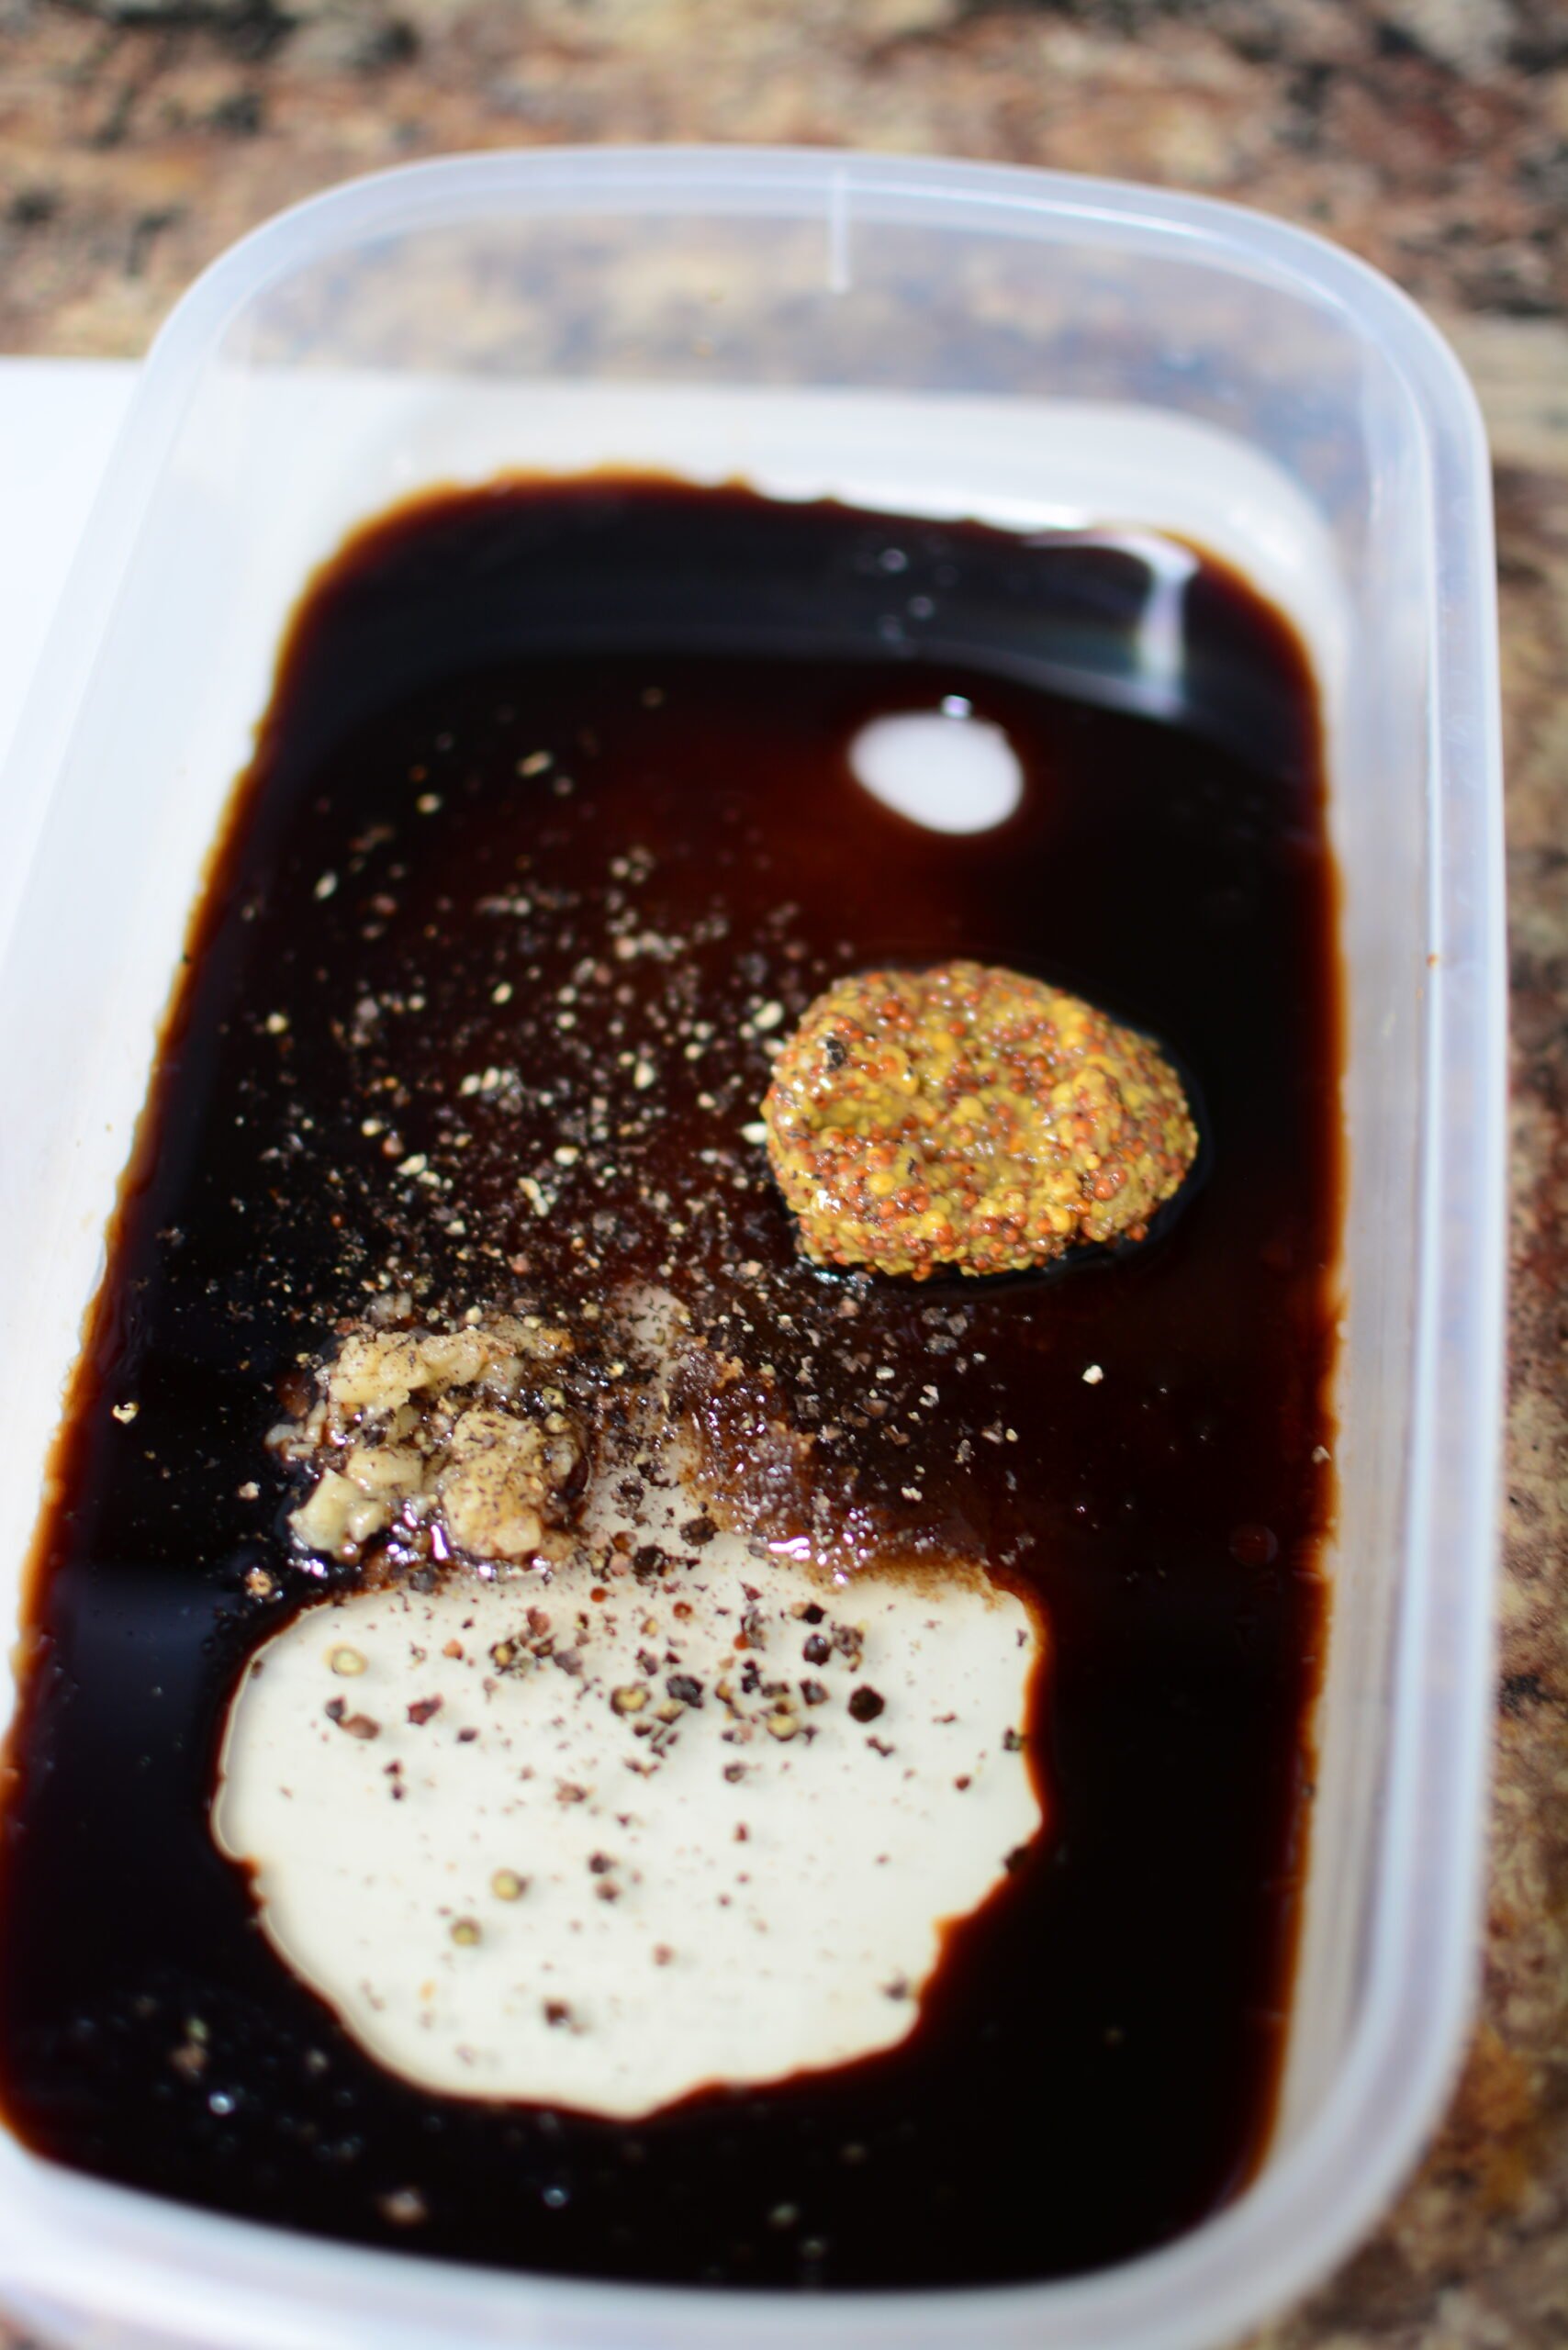 Ingredients unstirred in a container to make the balsamic marinade.